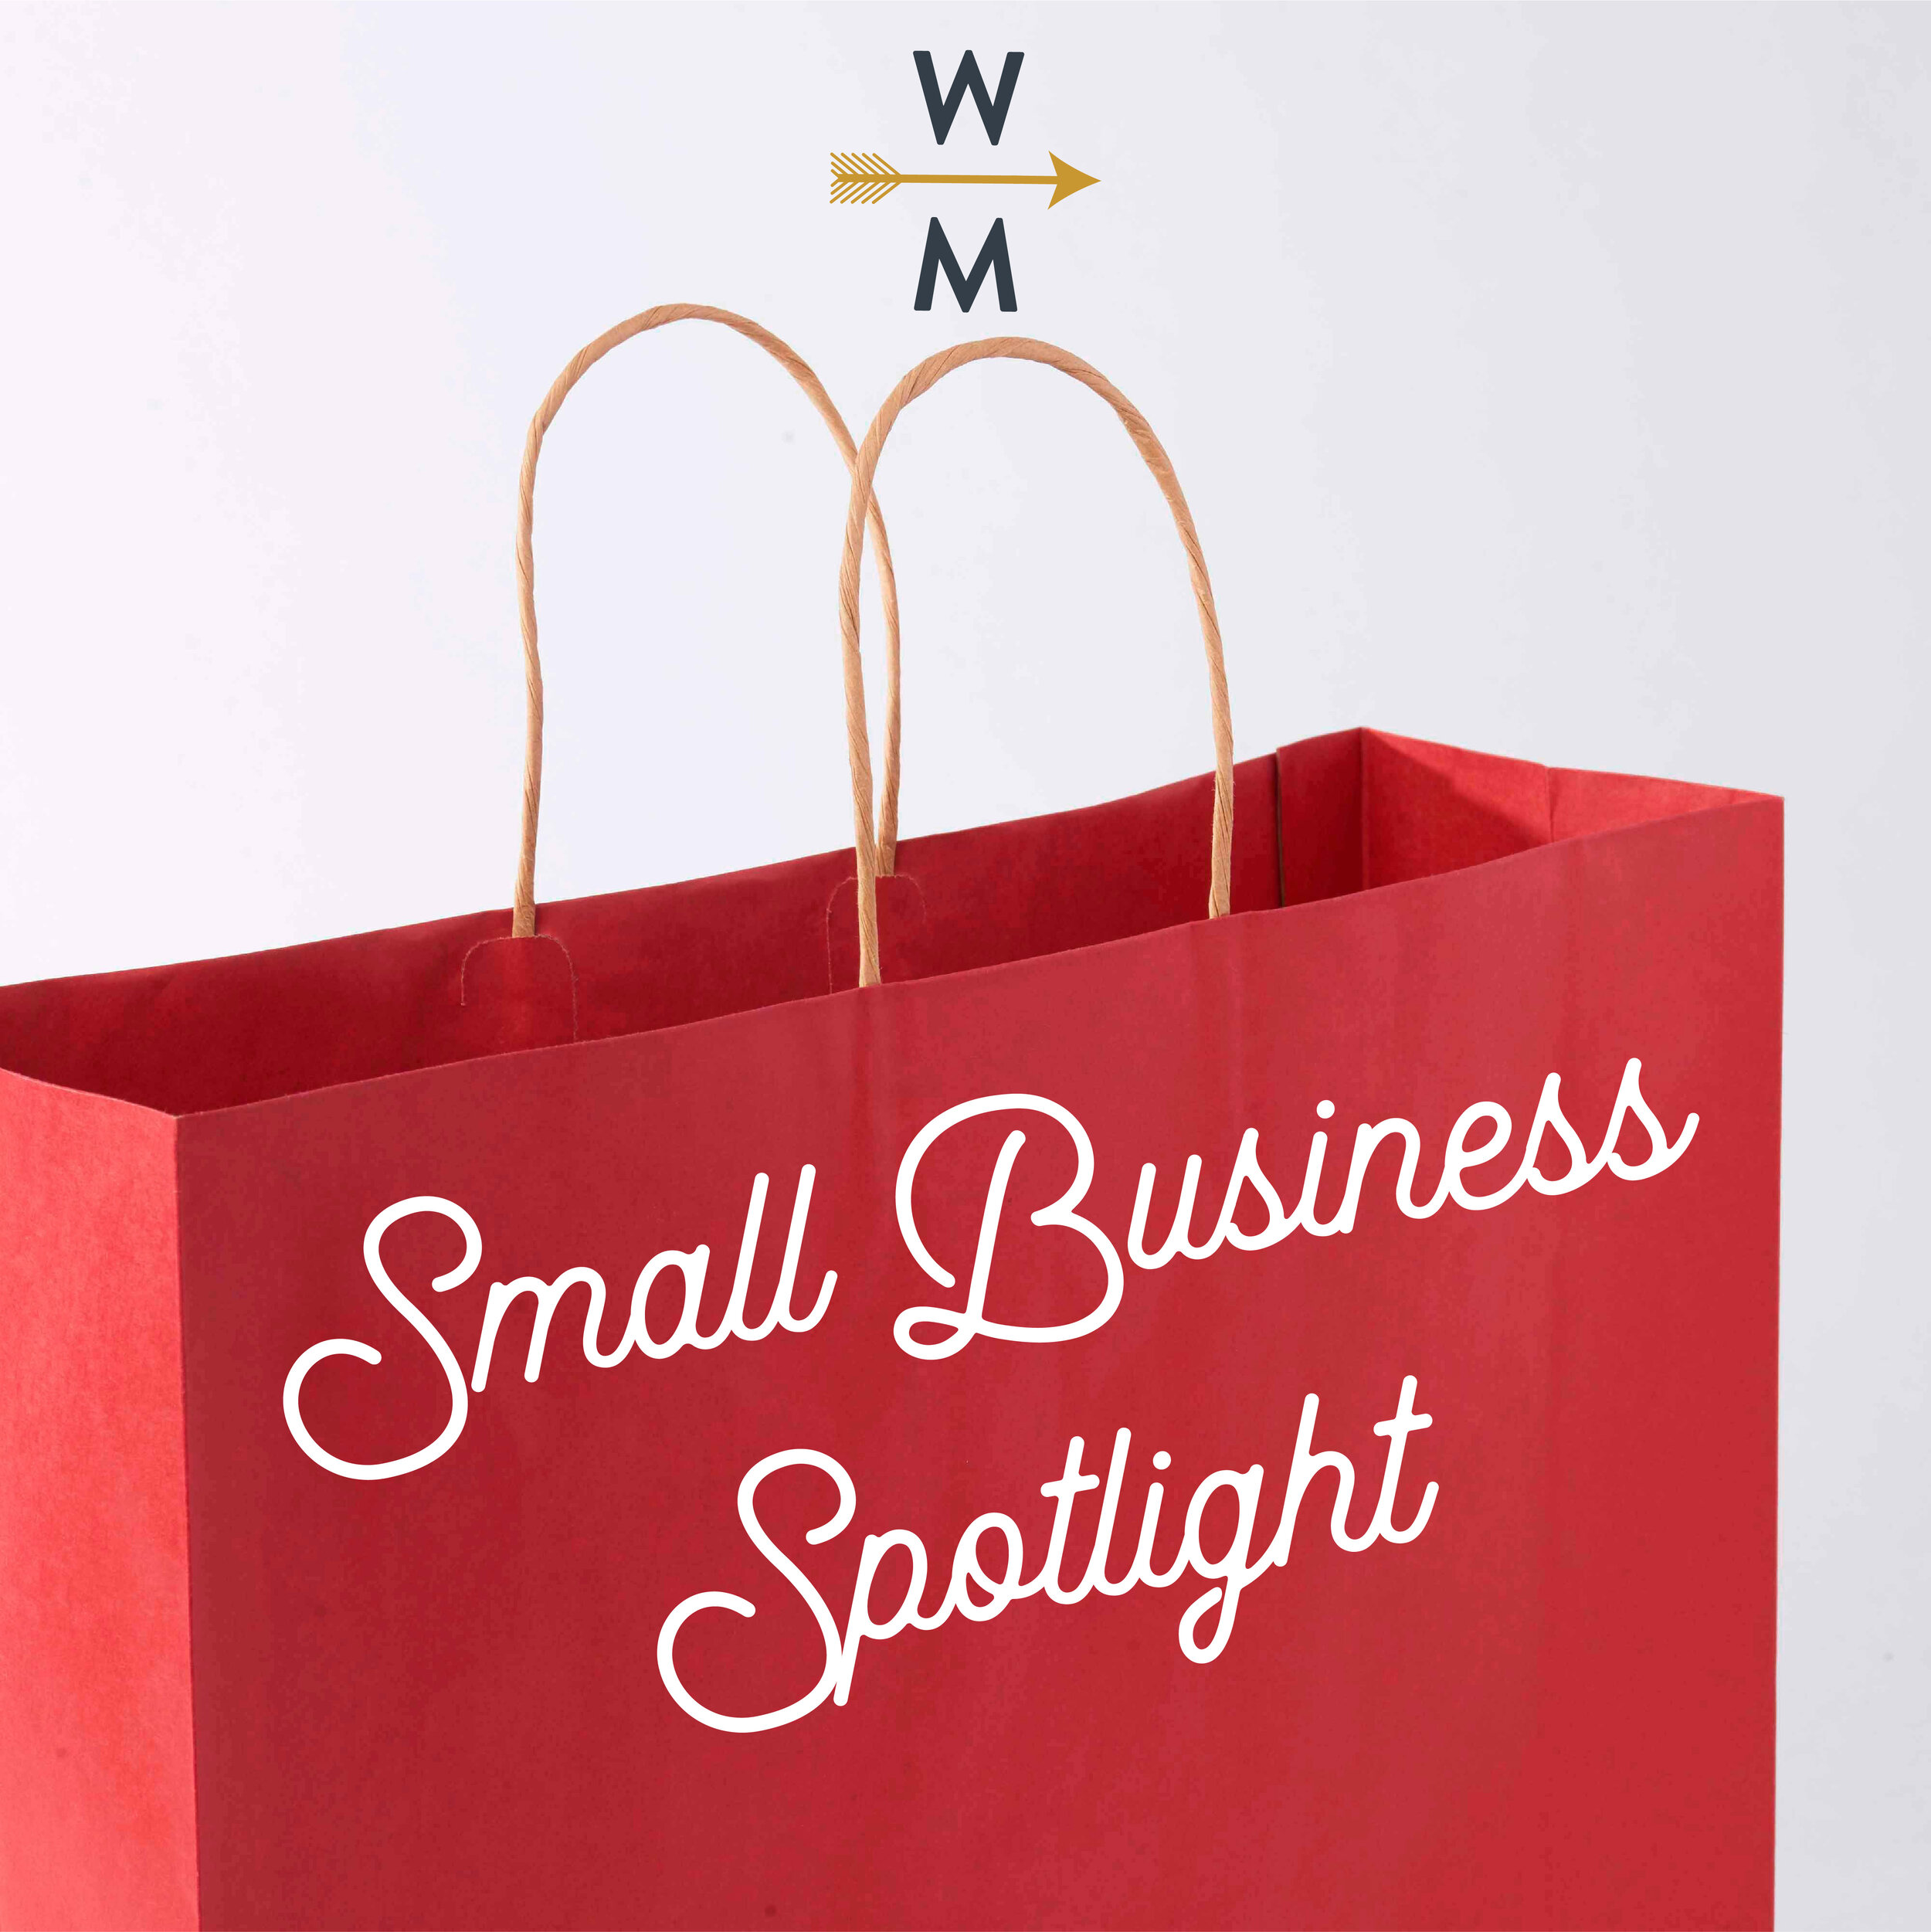 Small Business Campaign-01.jpg